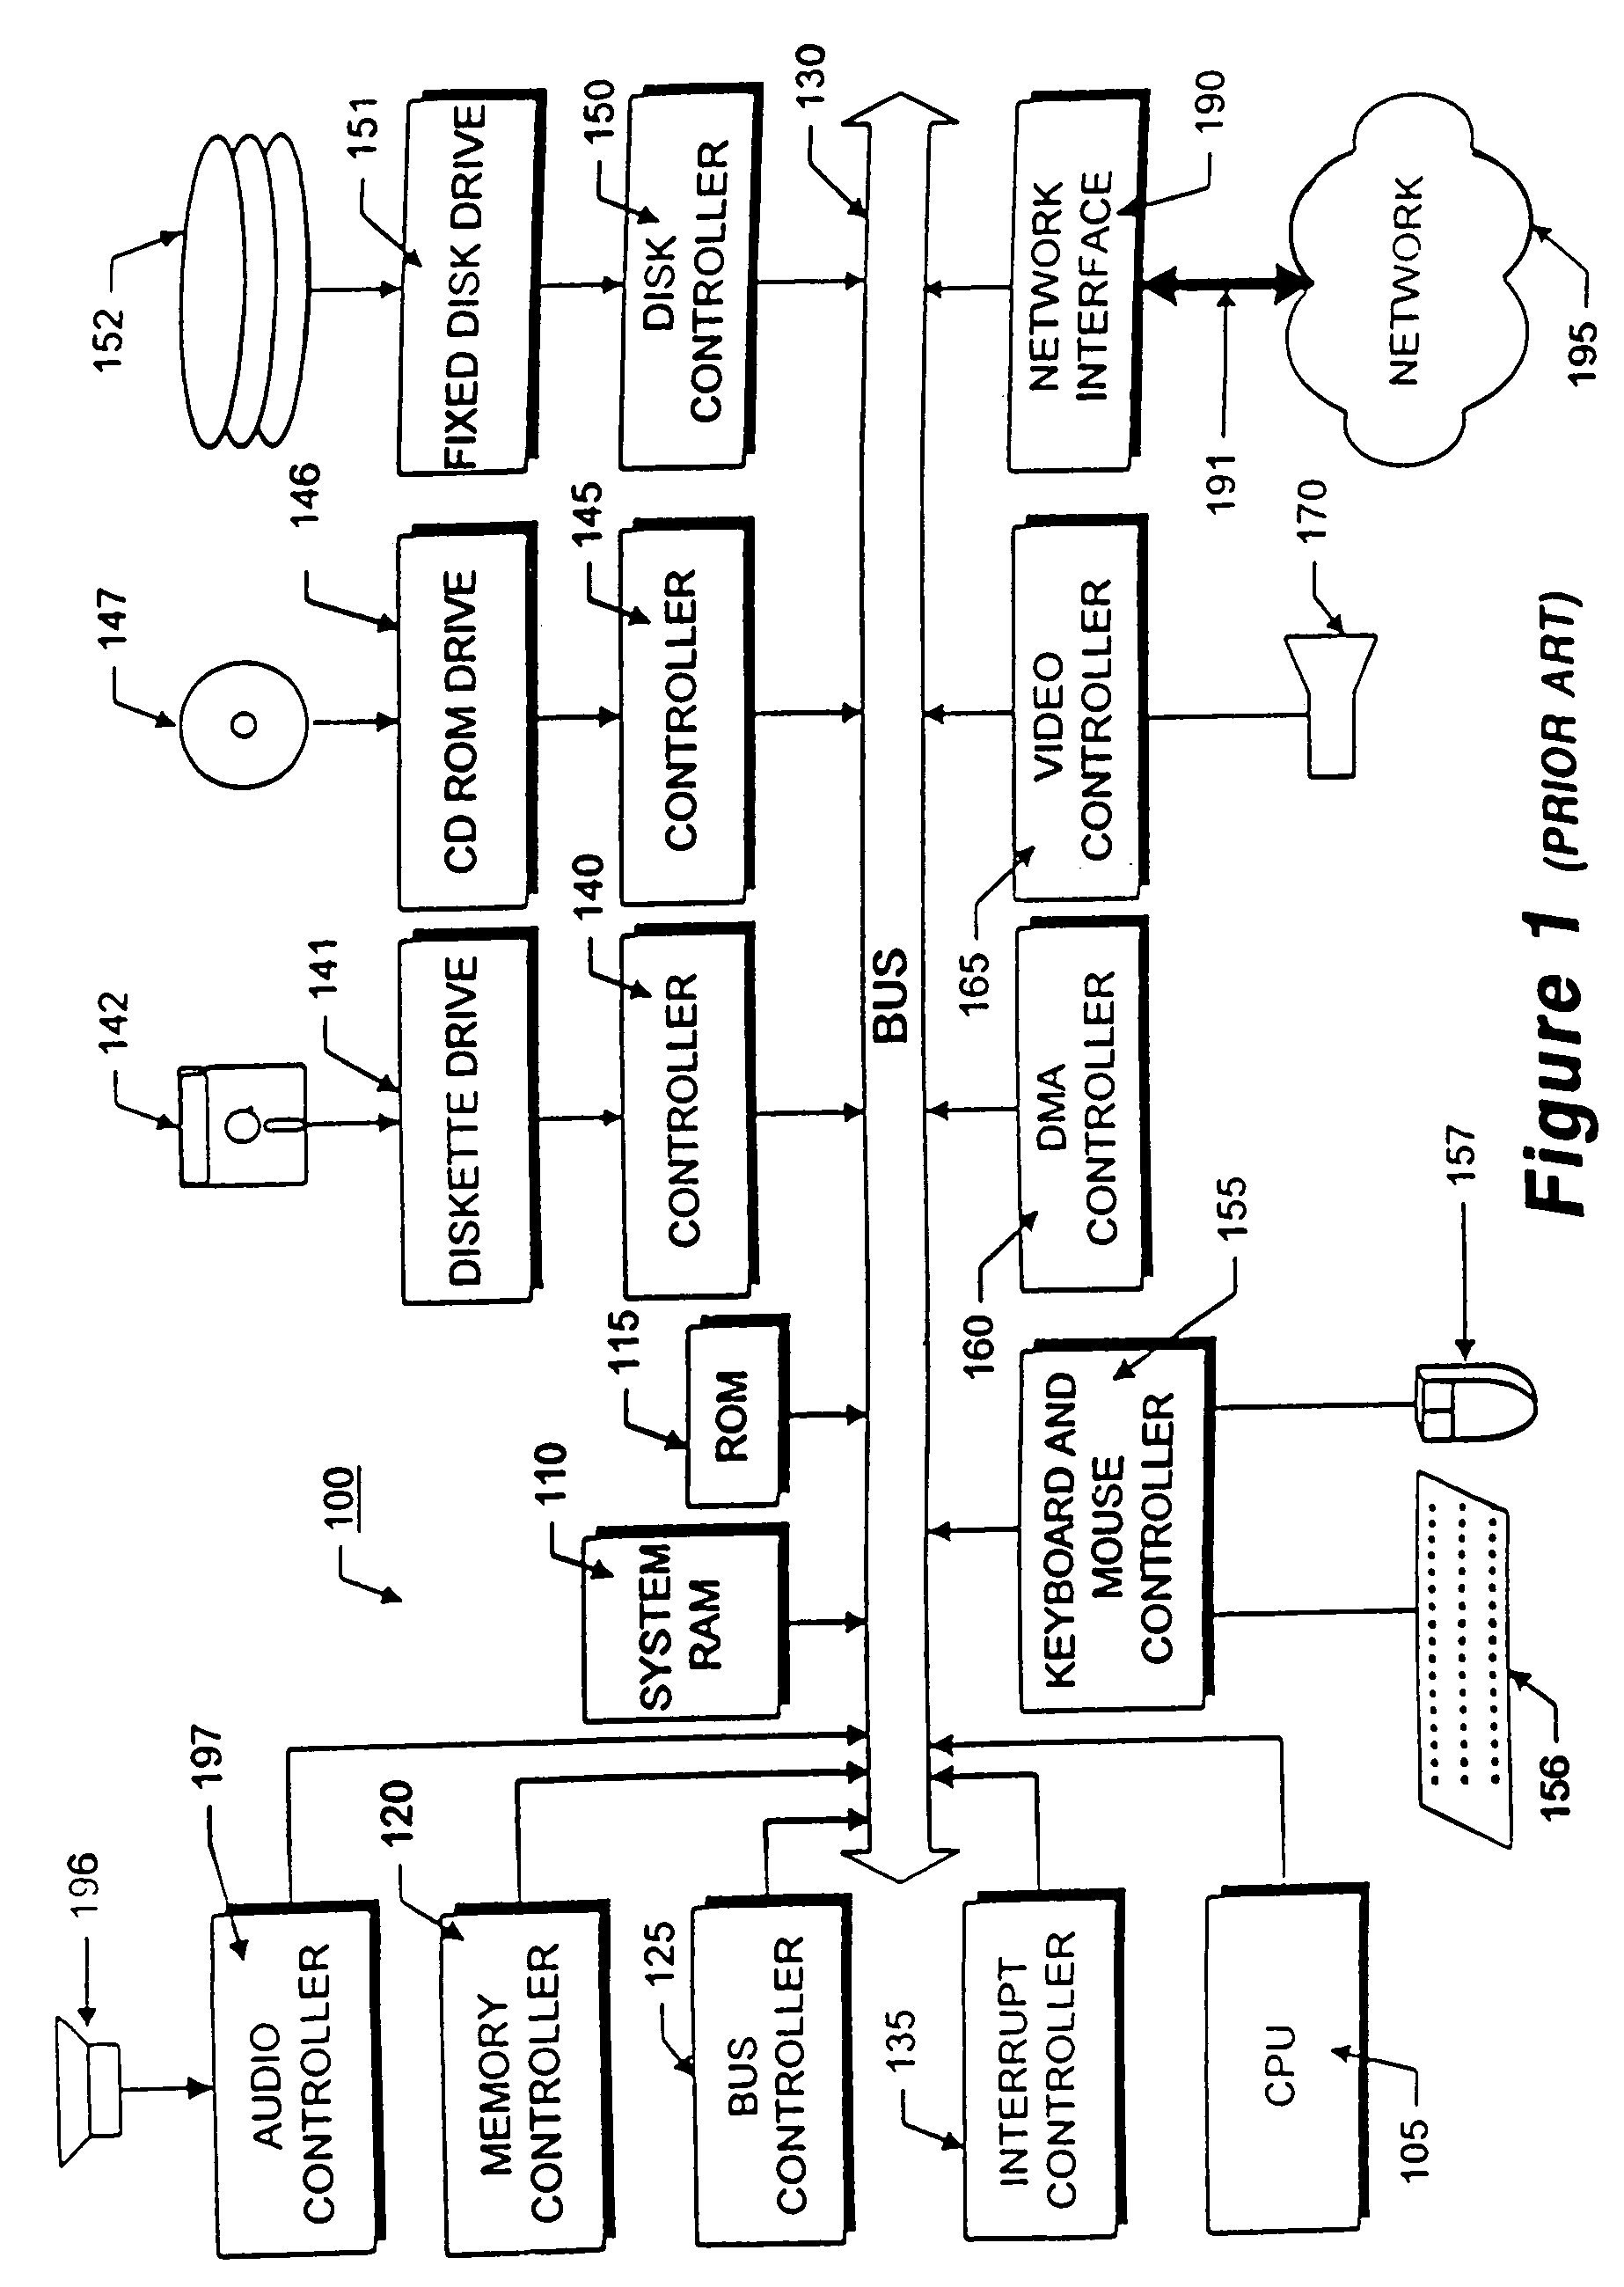 Method and apparatus for reordering data items